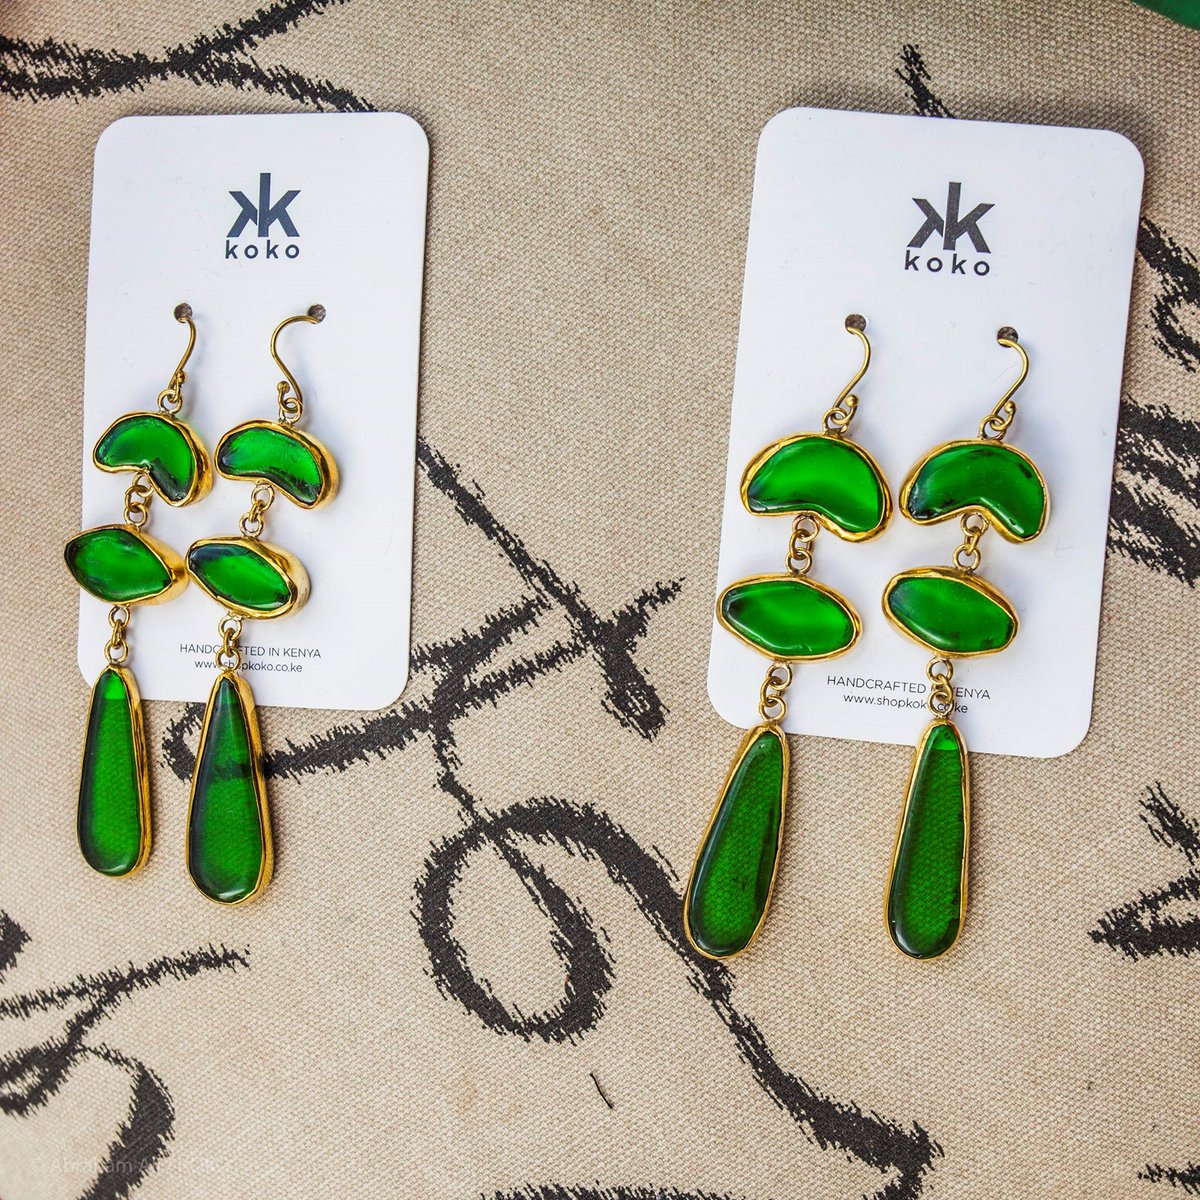 Green is the colour of life, renewal and energy. Traditionally also associated with 💴. This new week wishing all these for you!
#KoKobyKhakasa #BrassEarrings #GlassEarrings #GreenEarrings
#GiftsForHer #WomensFashion  #Accessories #Elegant #Jewelry #Handcrafted #MadeInKenya